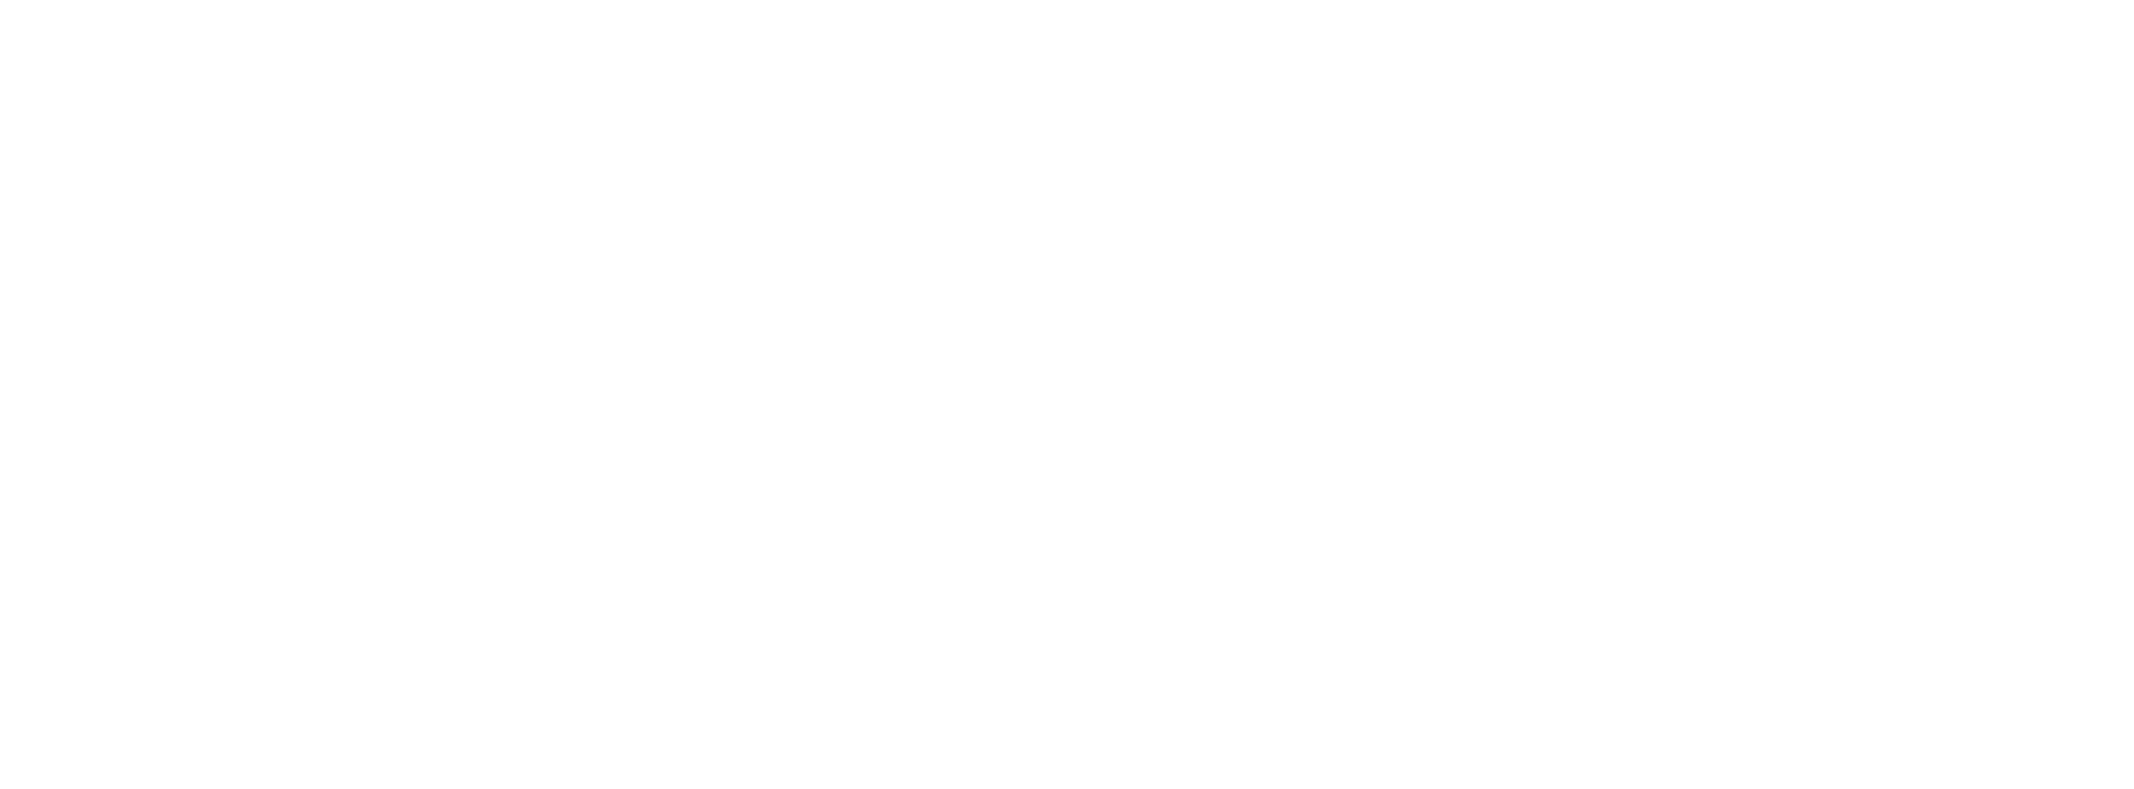 USGS white T.png